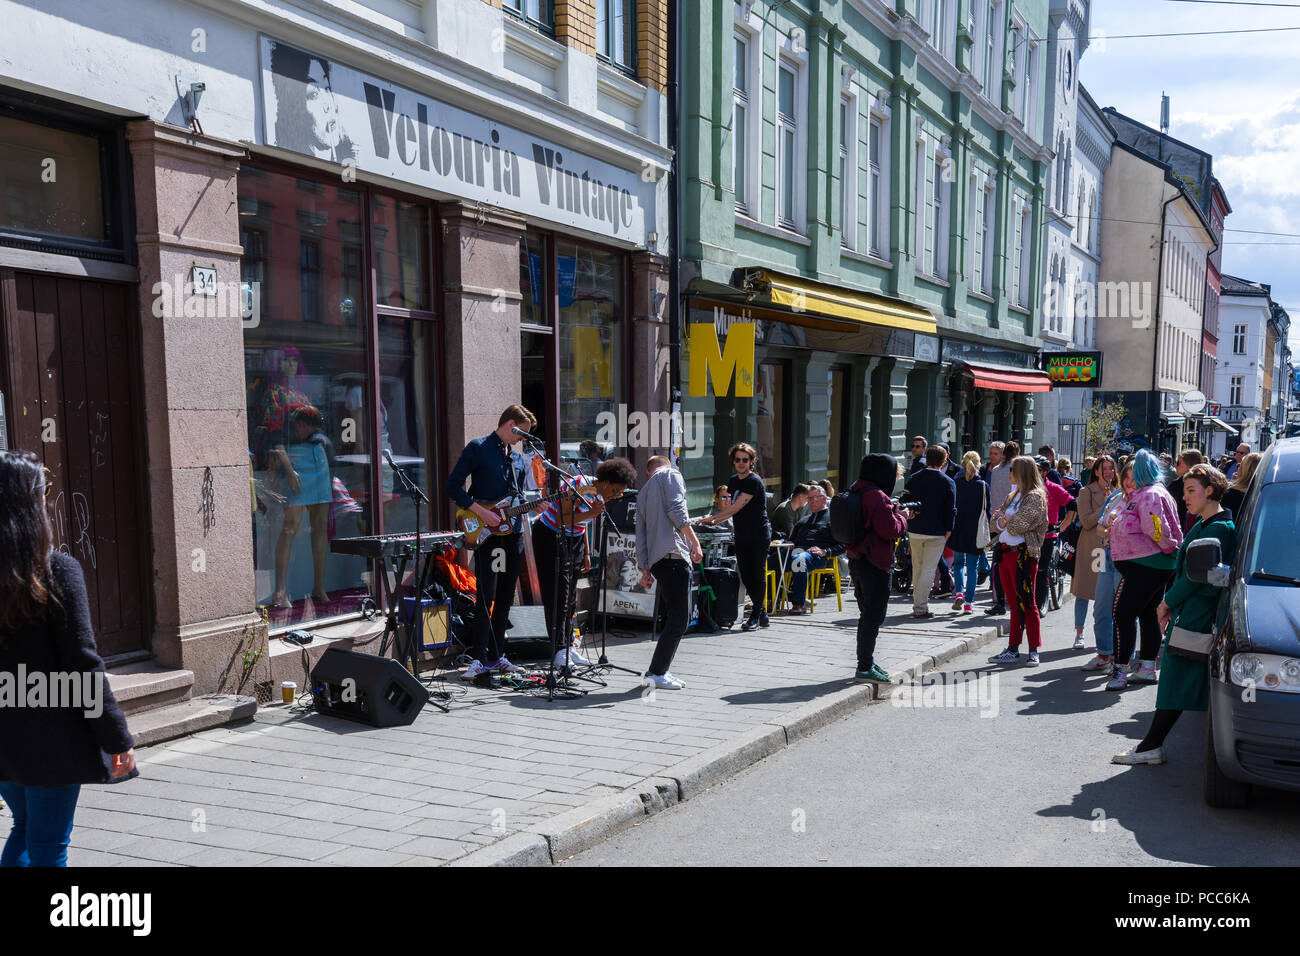 OSLO, NORWAY 28 APRIL 2018: Musical group prepares to play in the Grünerløkka area, Oslo, Norway Stock Photo